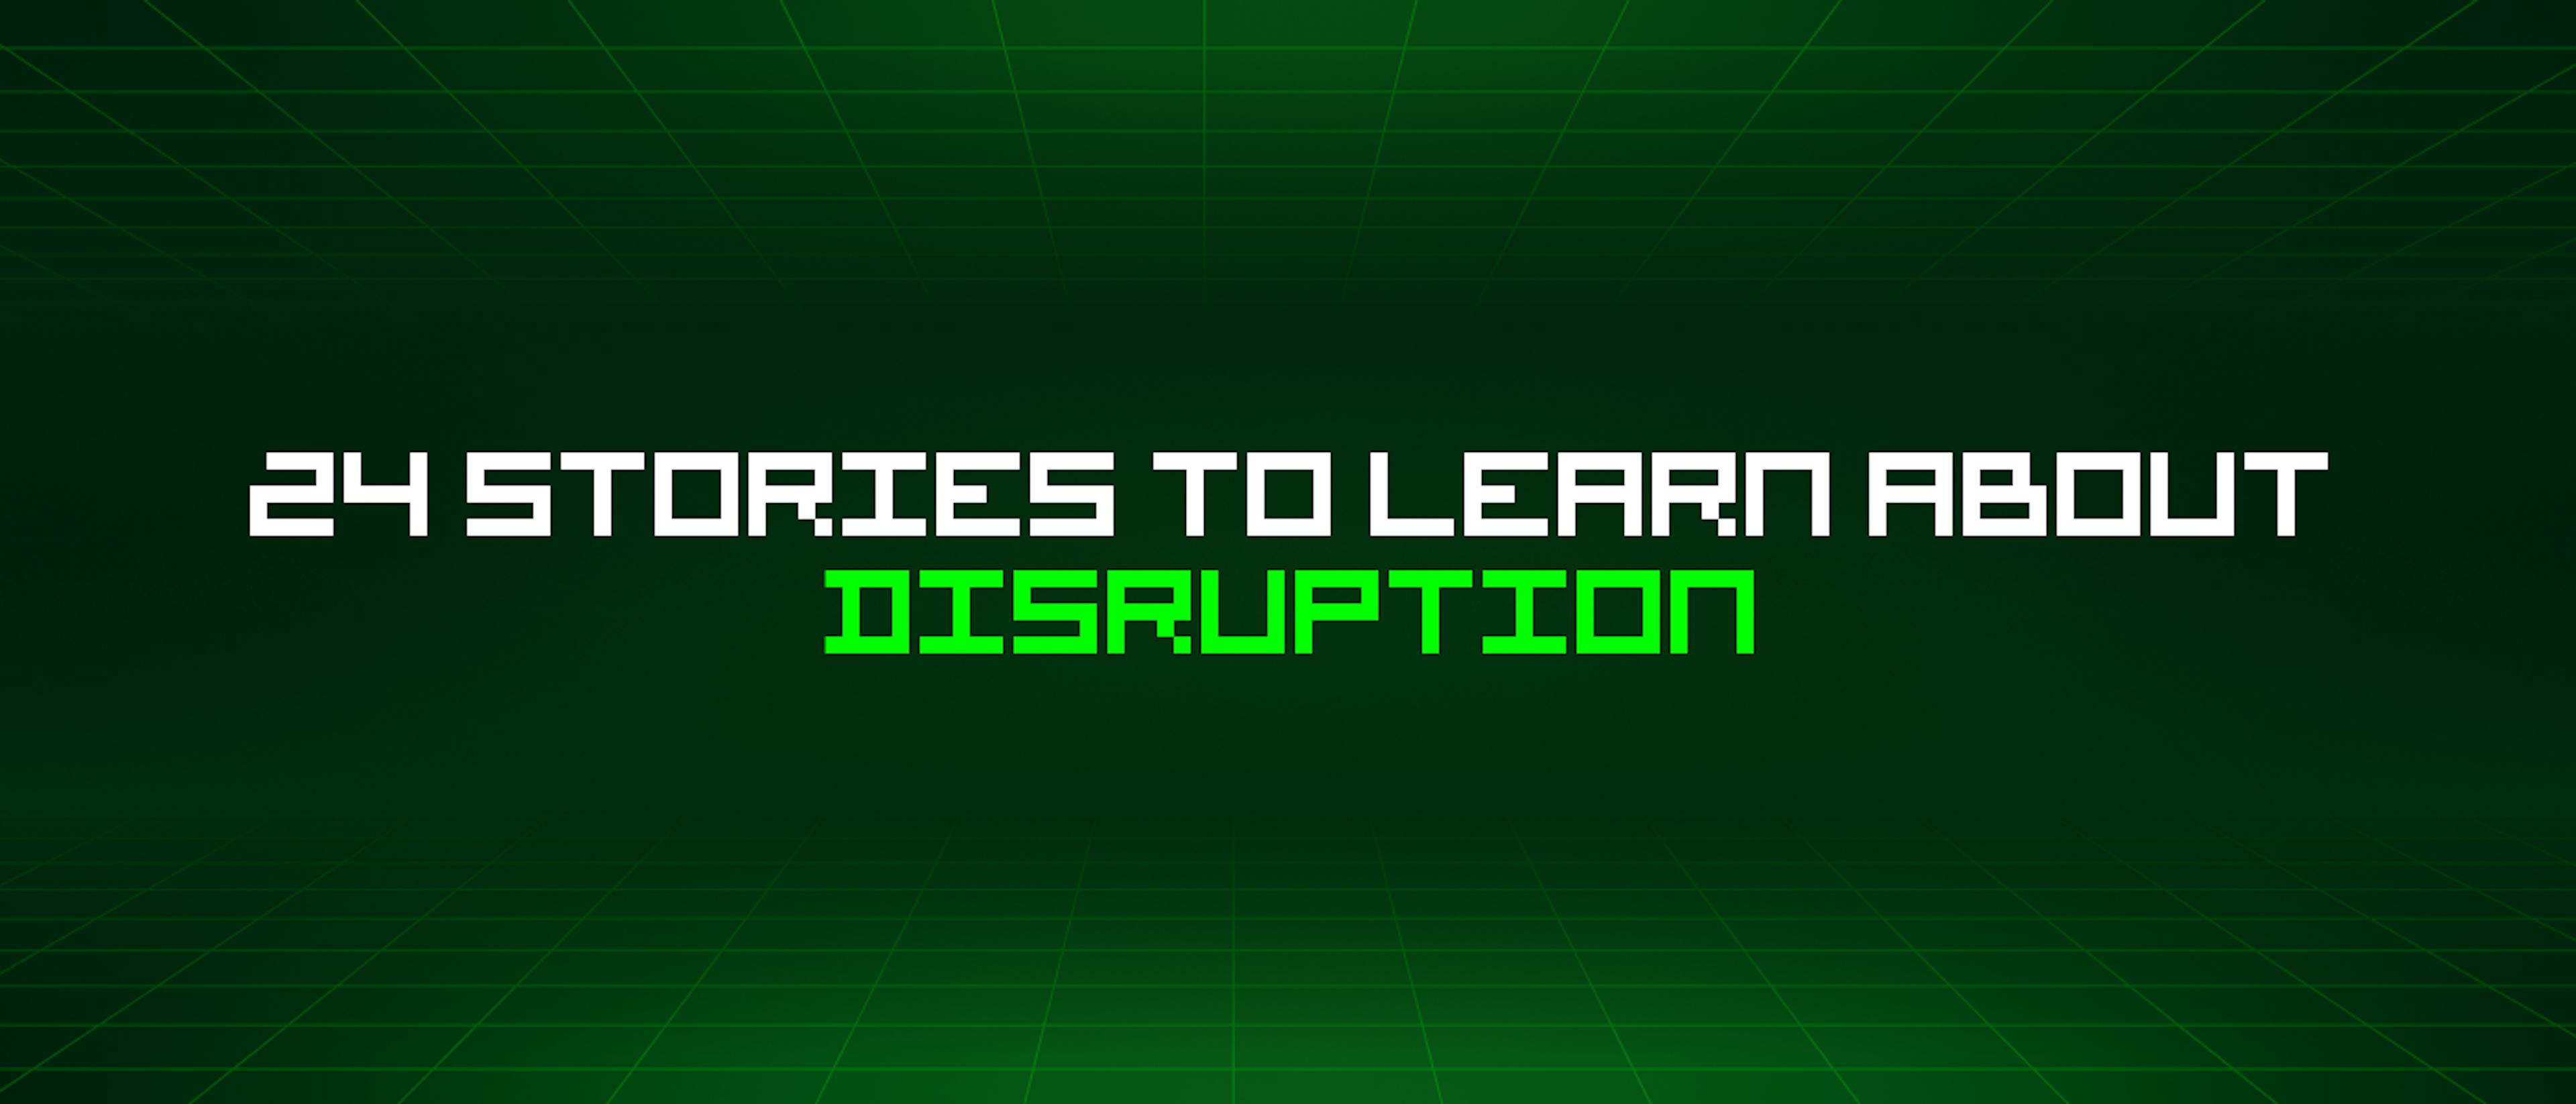 featured image - 24 Stories To Learn About Disruption